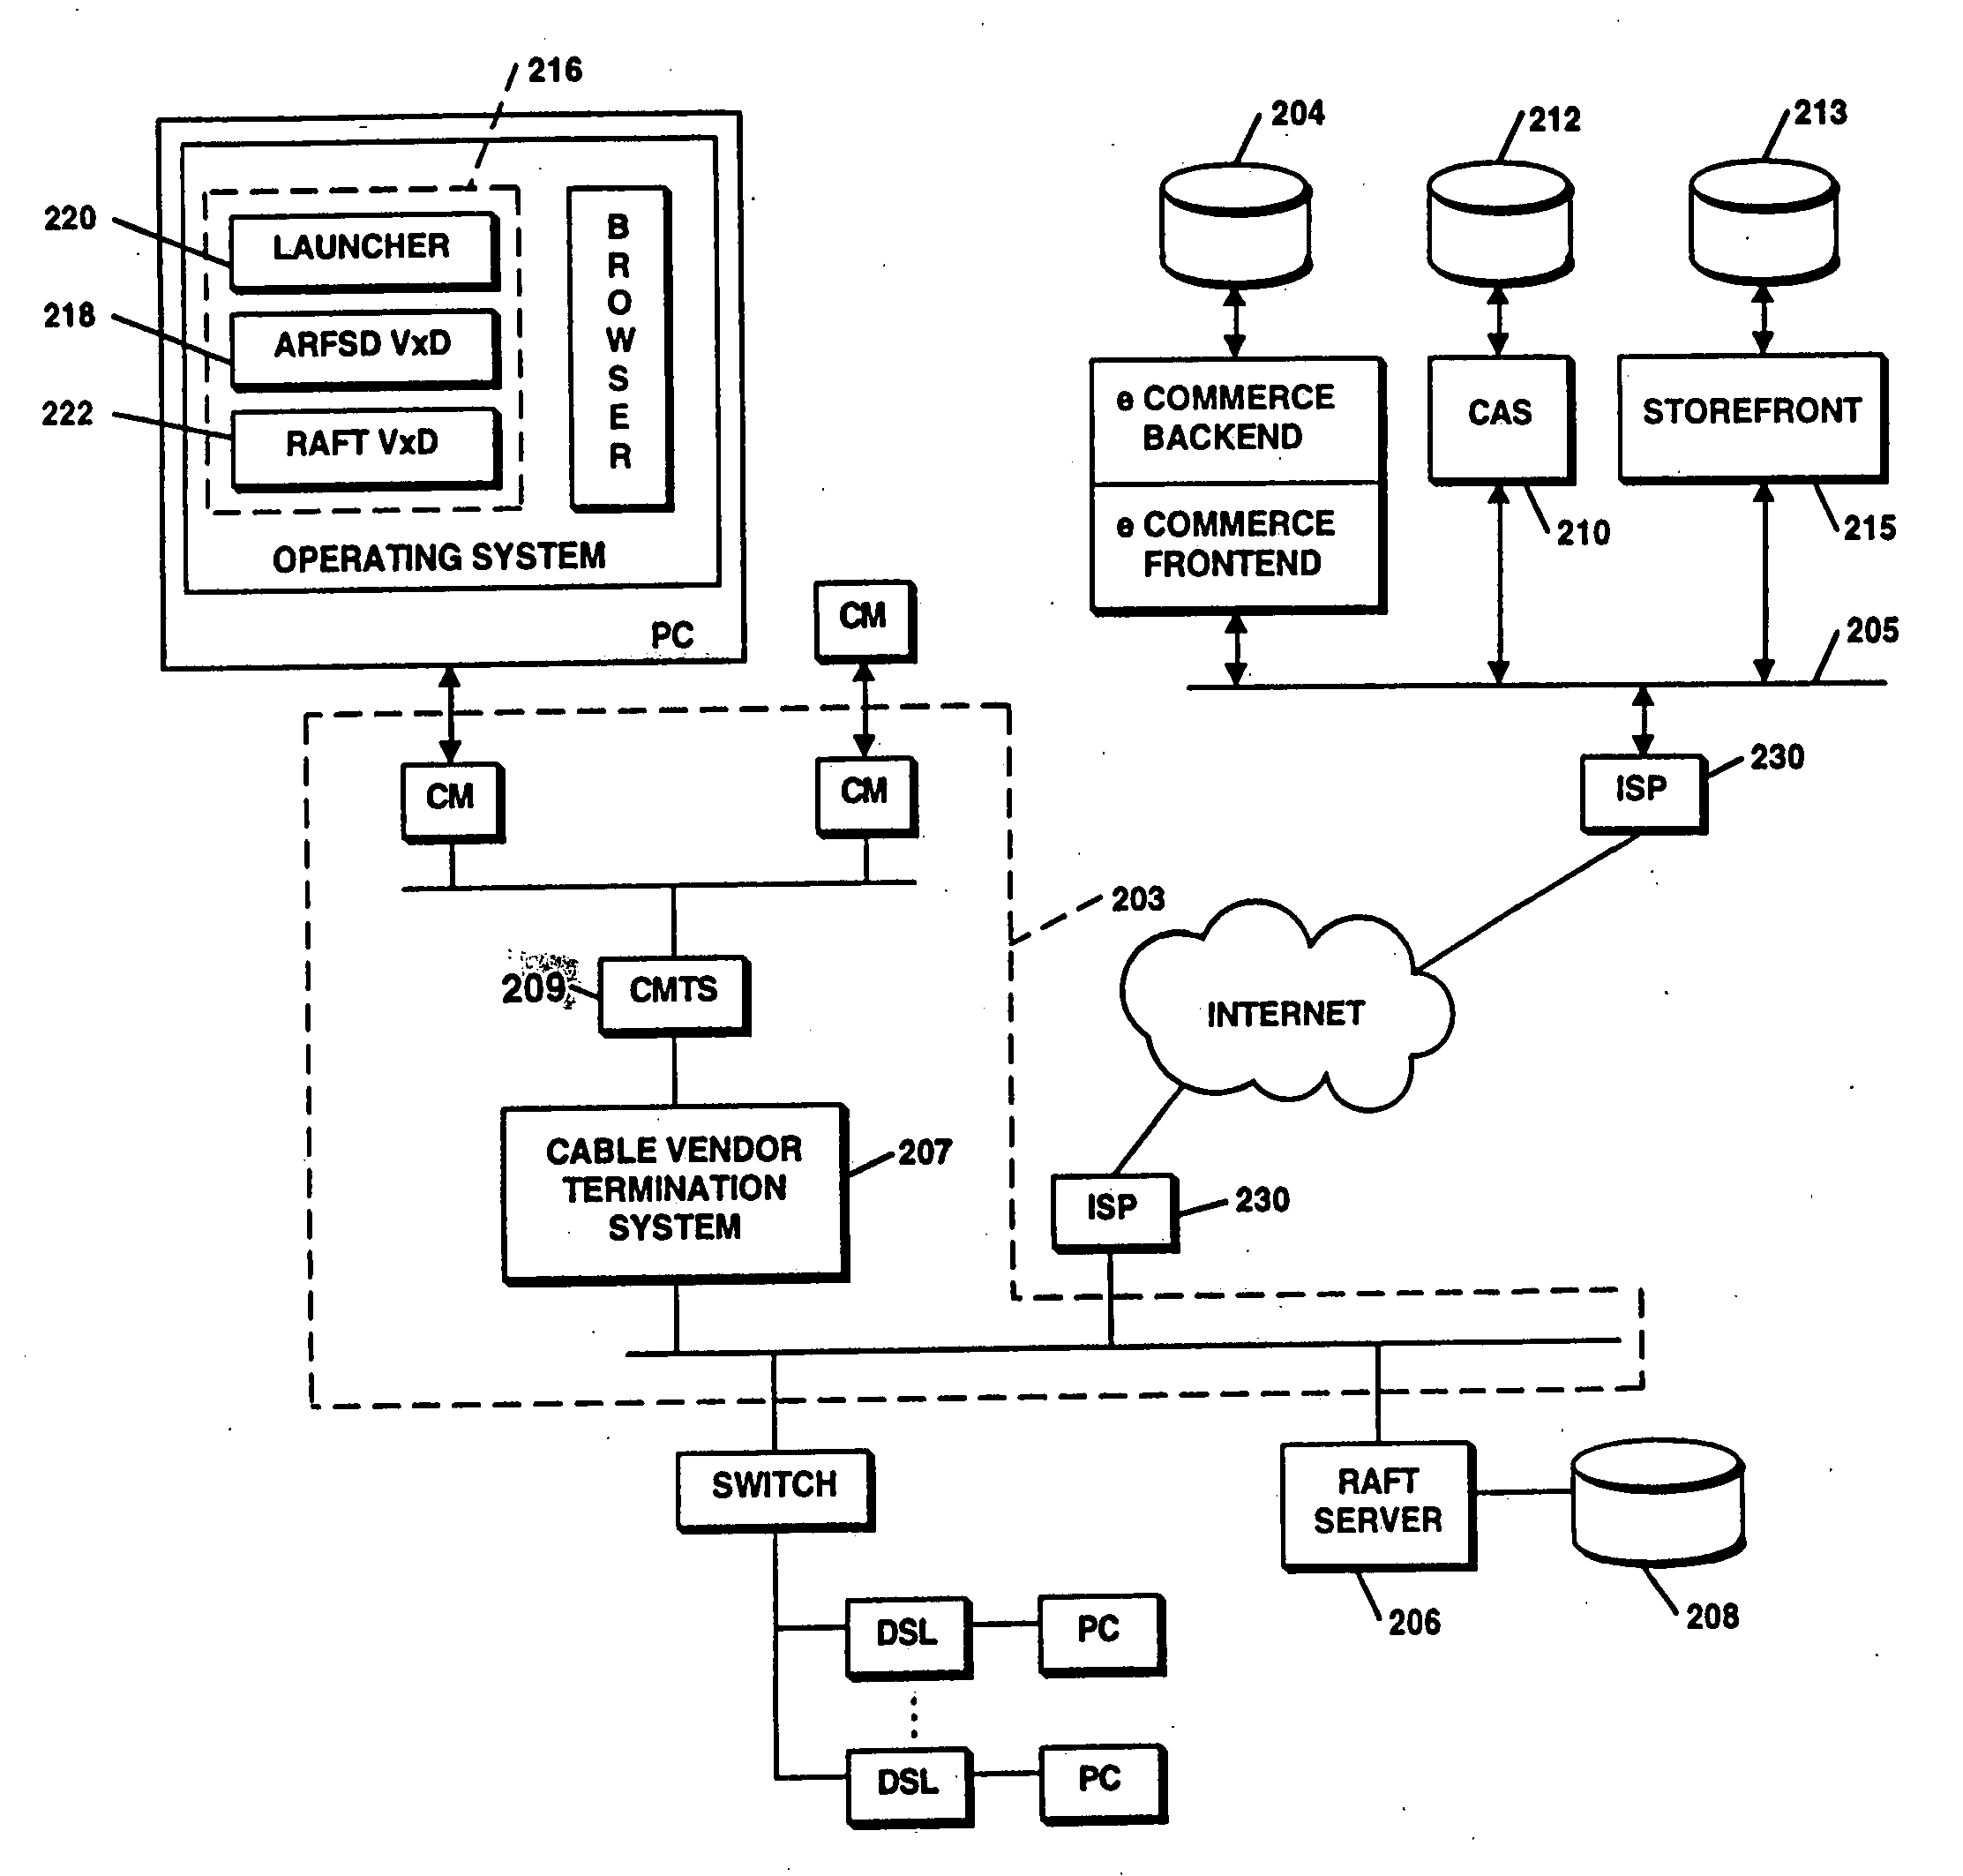 Method and apparatus for secure content delivery over broadband access networks